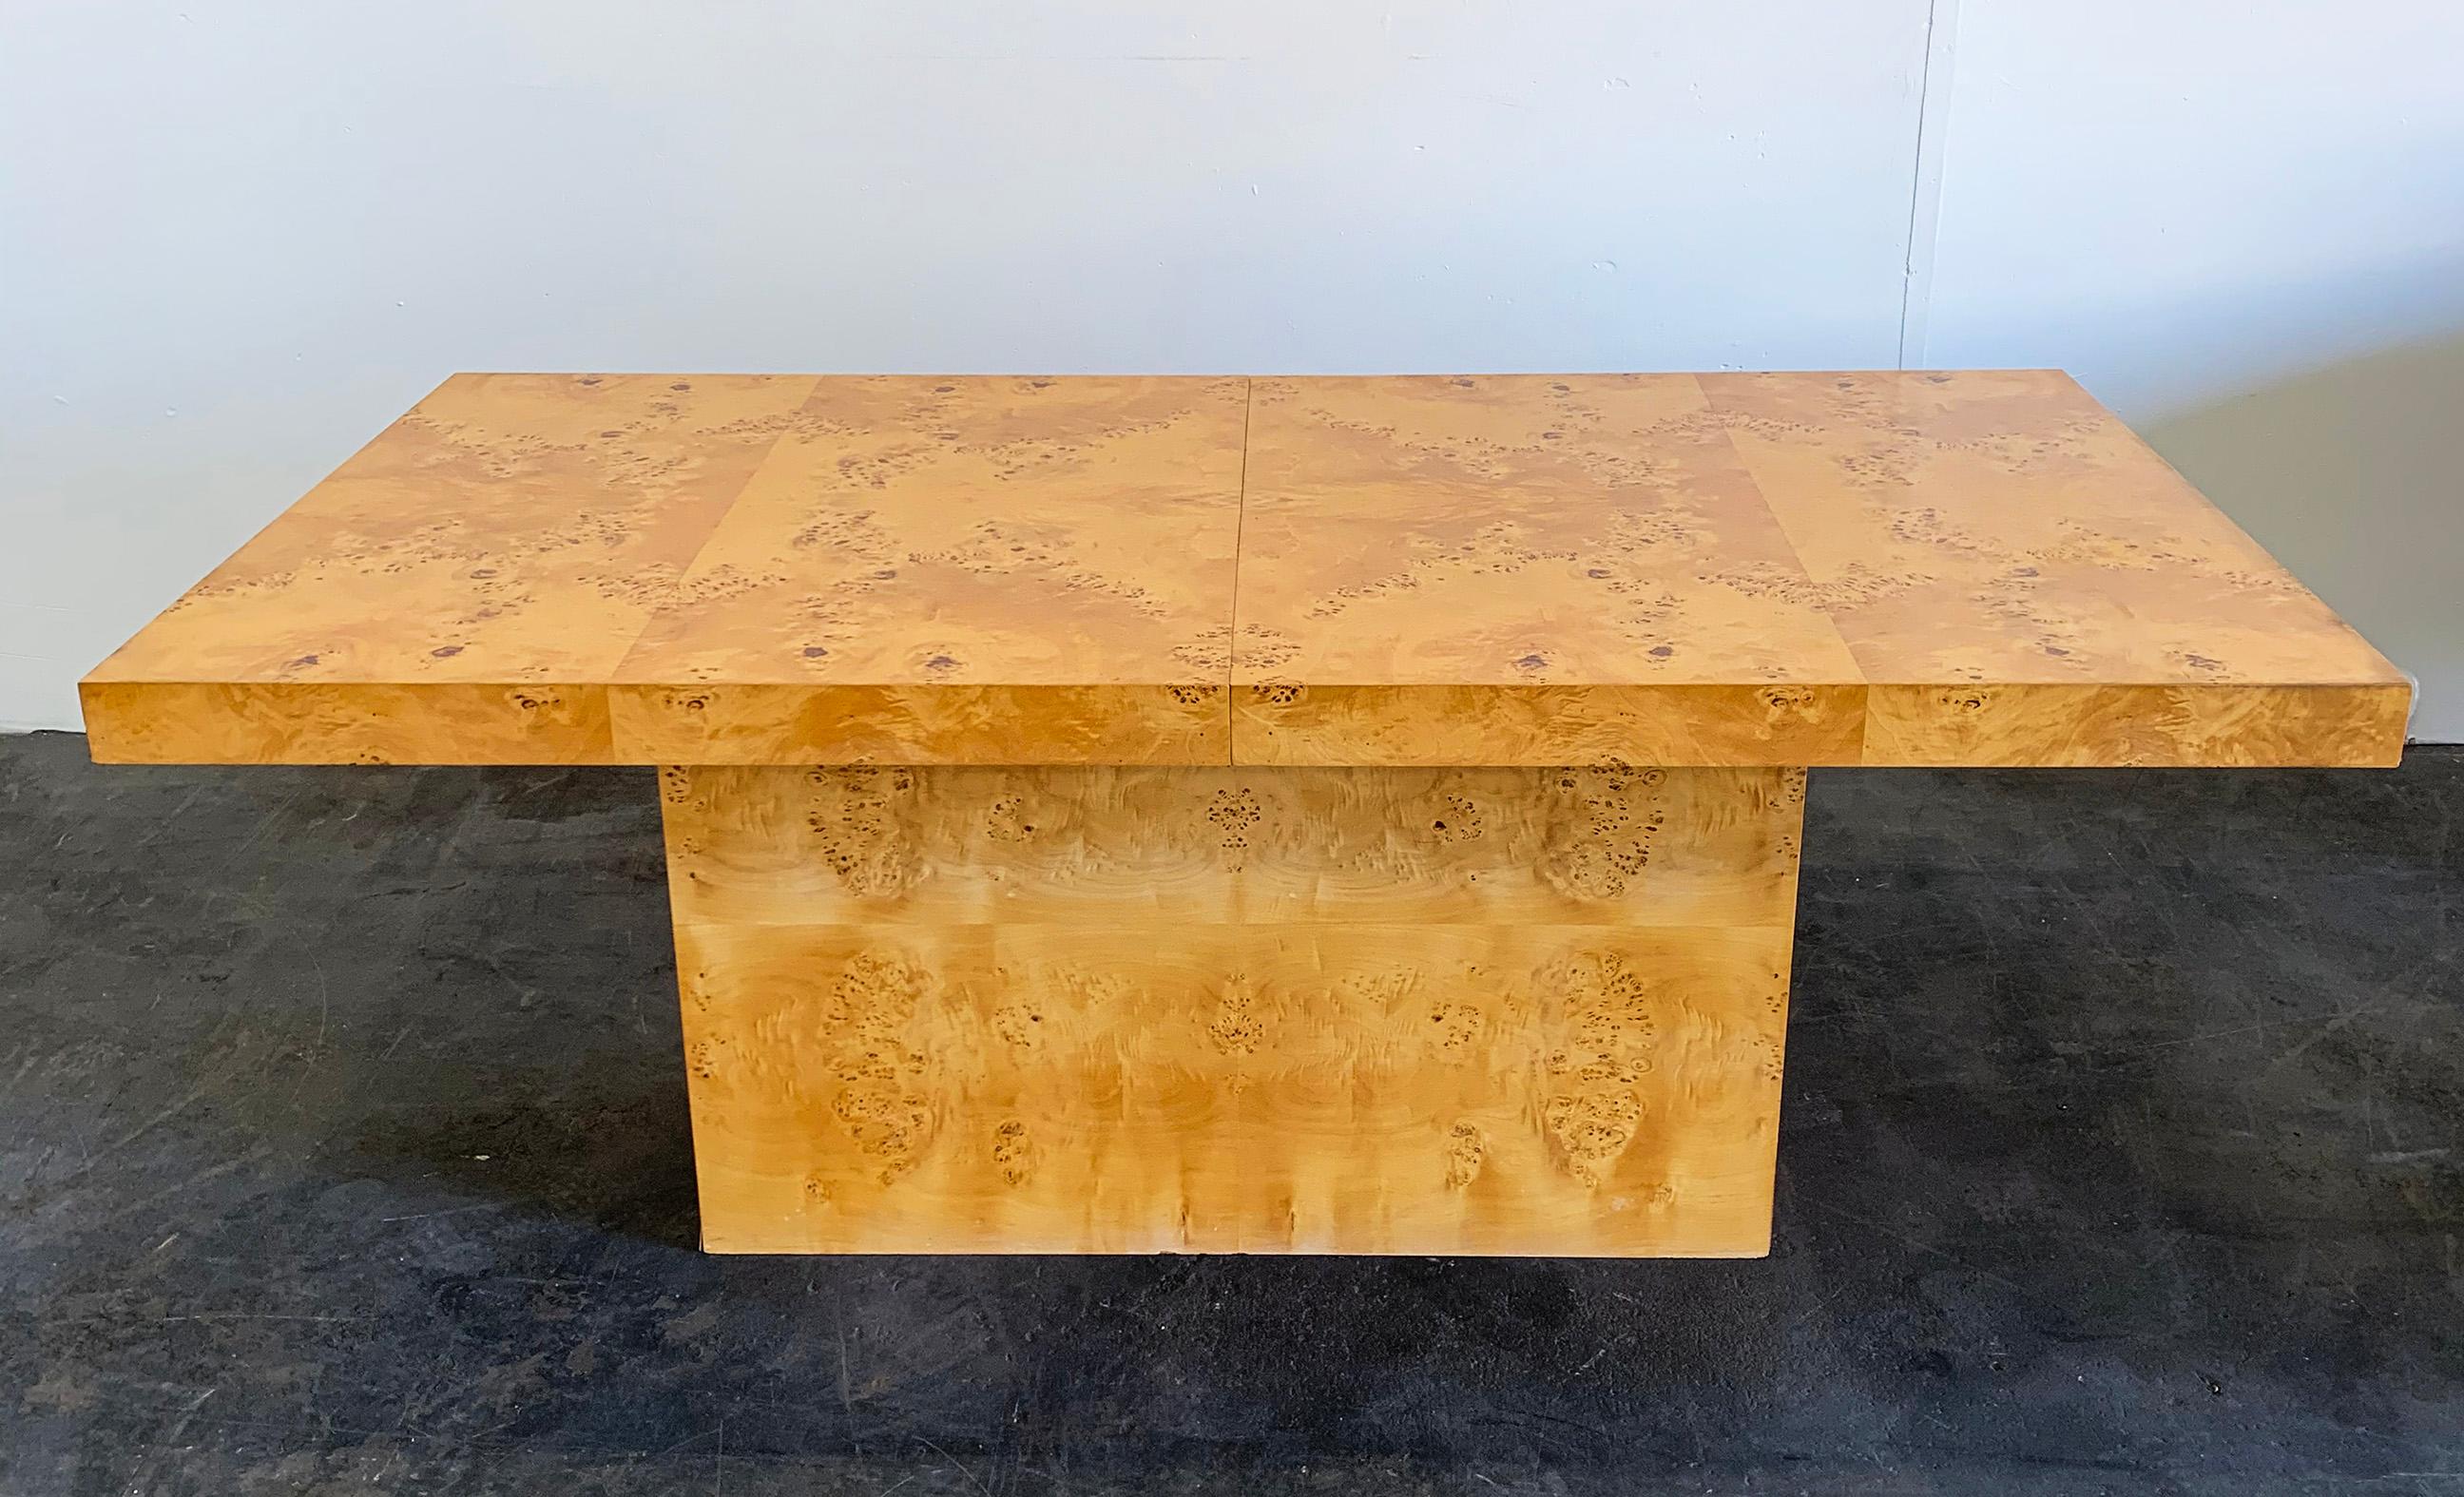 A stunning and timeless example of design, this Milo Baughman burl wood dining table is a true Classic. The dining table features a great burl pattern and is in good vintage condition with a warm honey patina throughout.

The leaves of the table